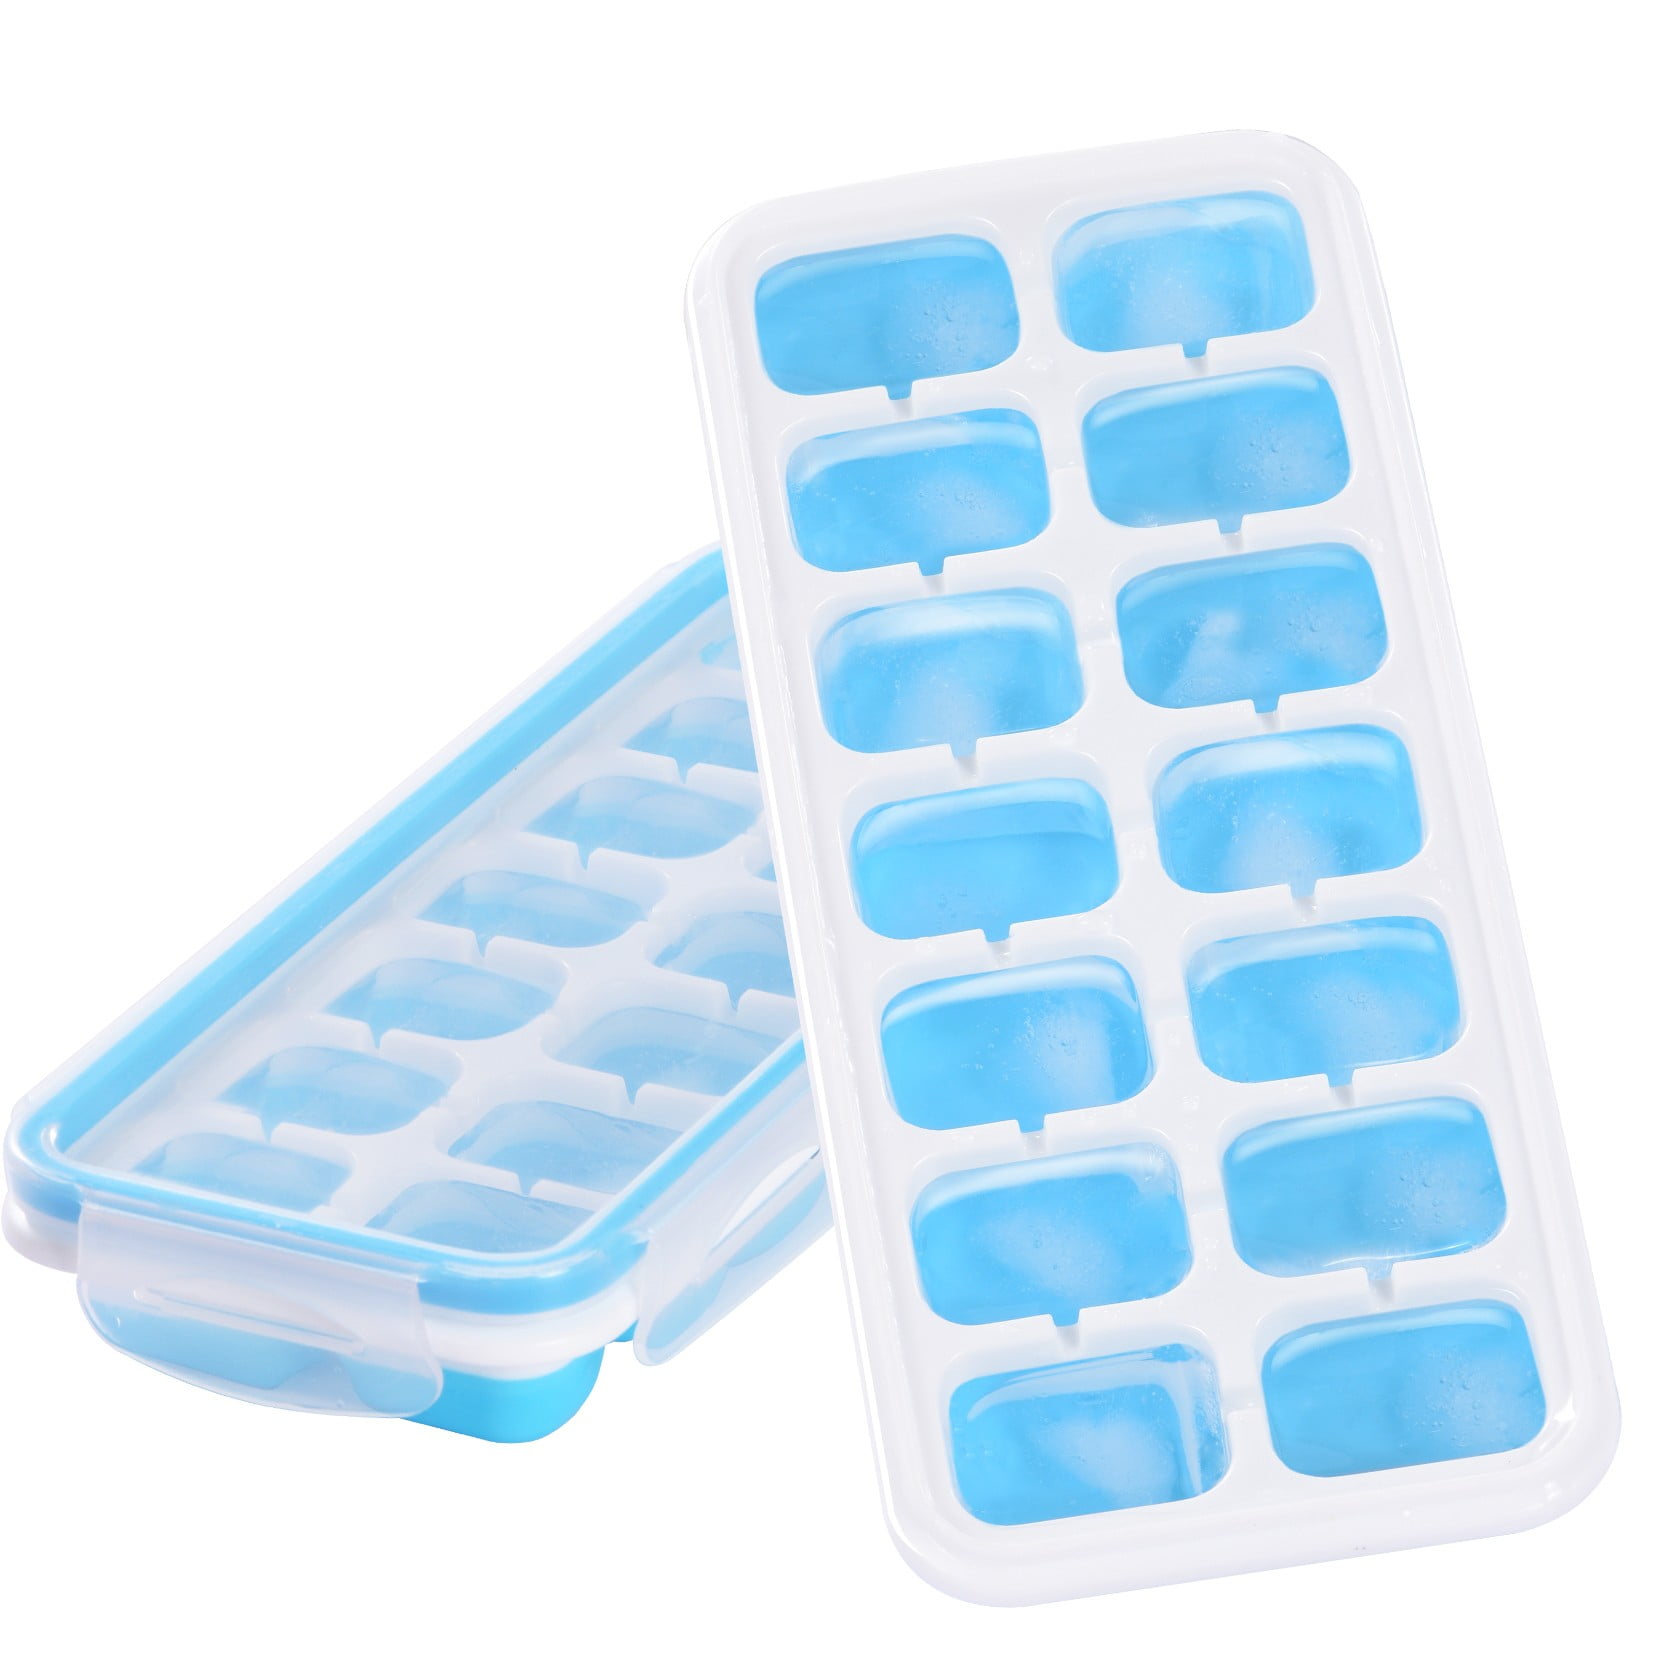 Silicone Ice Cube Trays 2 Pack with Removable Lids 28 Ice Cubes Molds Easy-Release Stackable LFGB/FDA Approved BPA-Free Ice Cube Tray Set